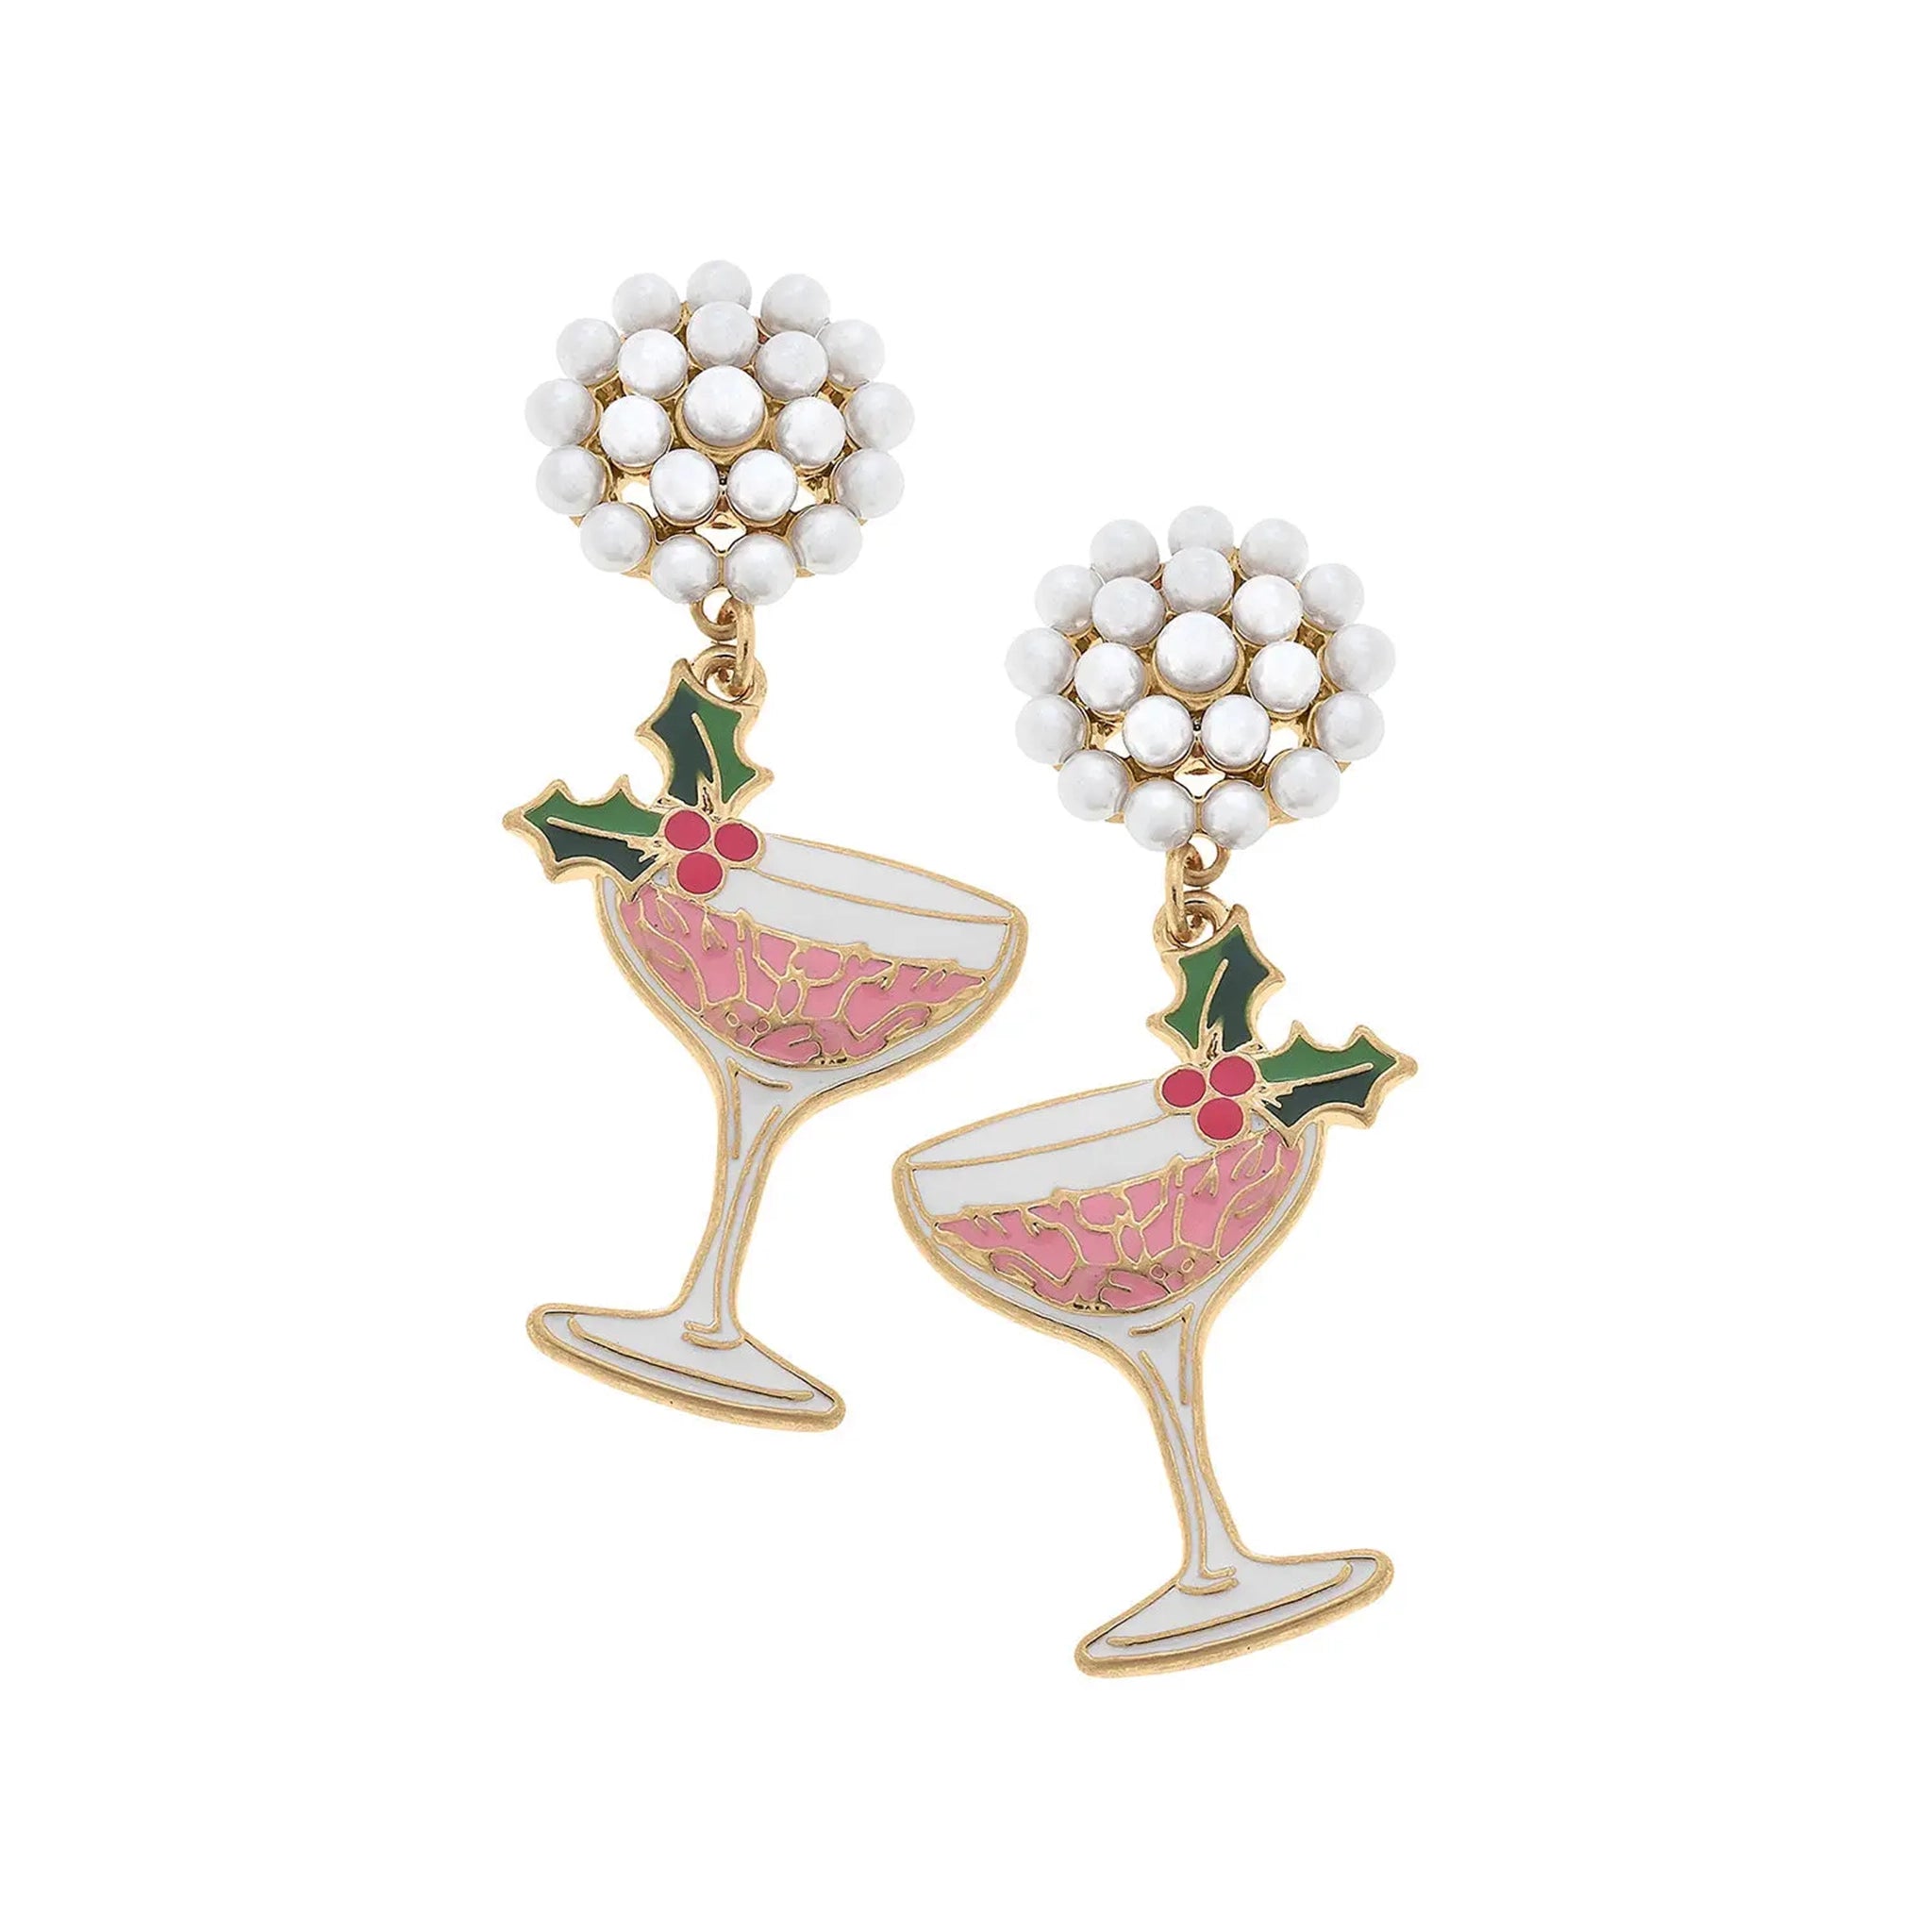 On a white background is a pair of dangling earrings in the shade of a coupe glass with a pink beverage and a holly garnish. 